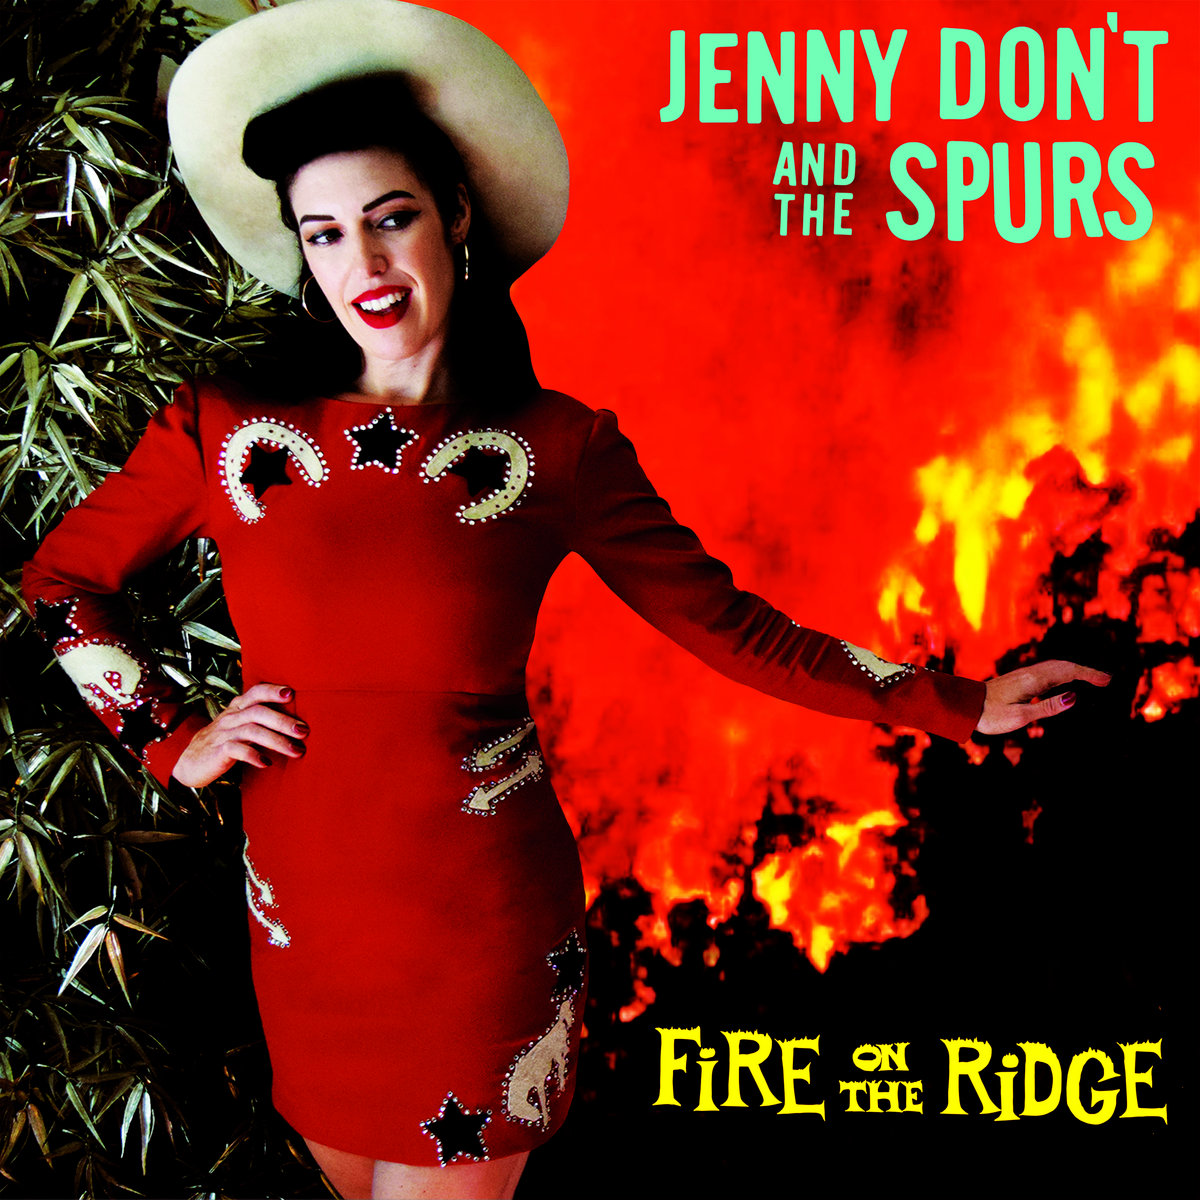 Jenny and the Spurs – Fire on the Ridge